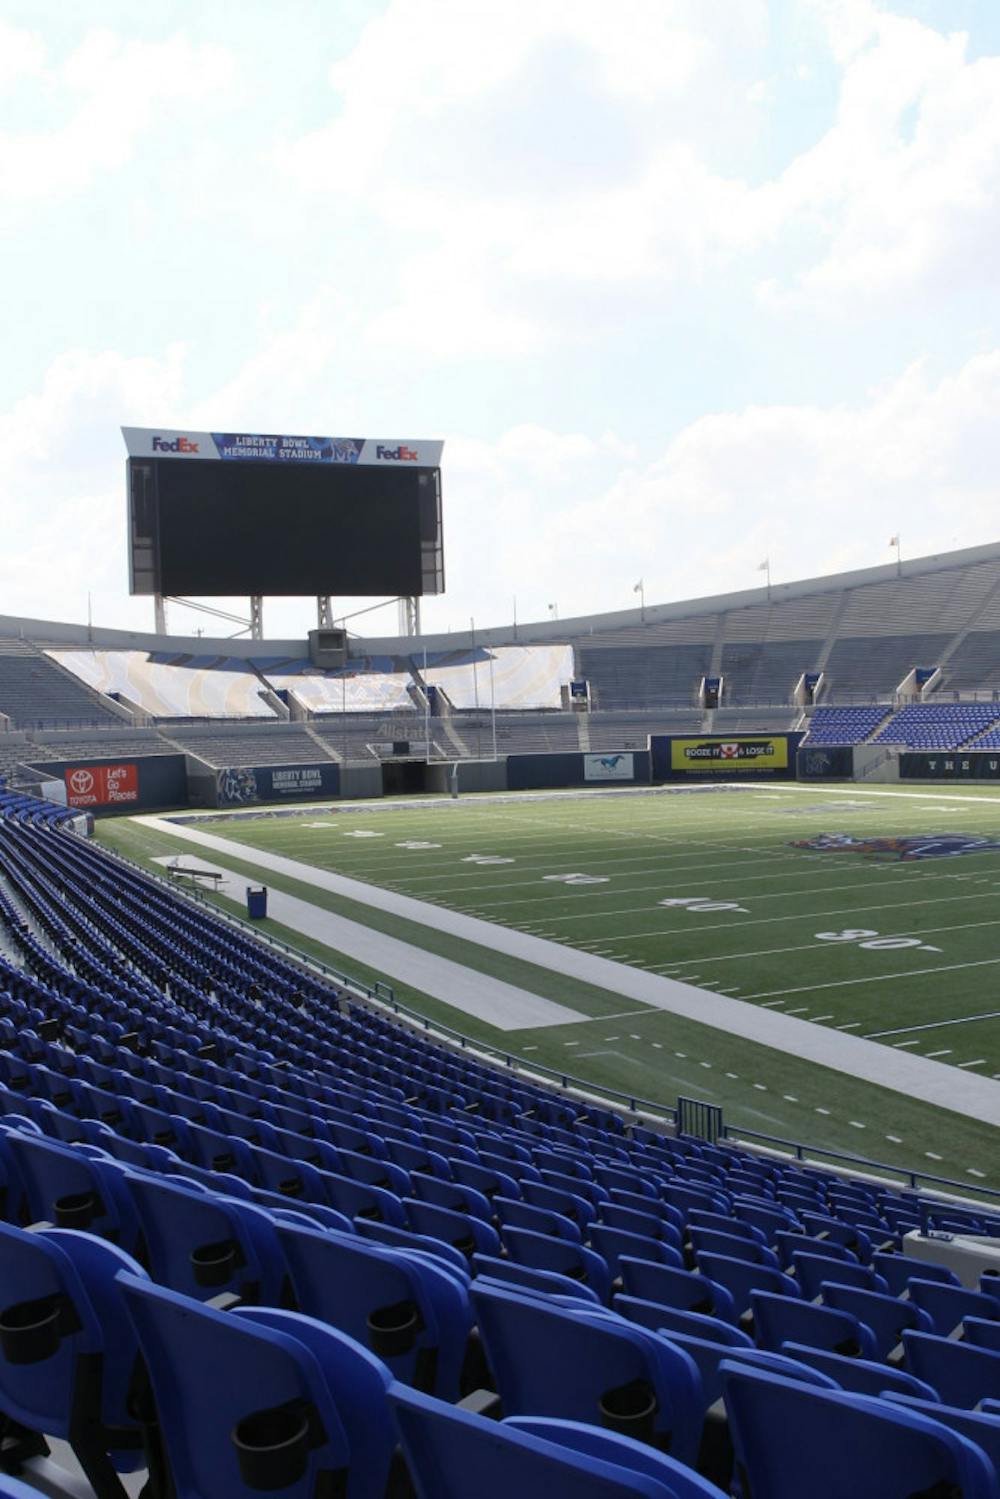 <p>Close to 4500 seats were installed at the Liberty Bowl. The project is constructed by O.T. Marshall&nbsp;Architects.</p>